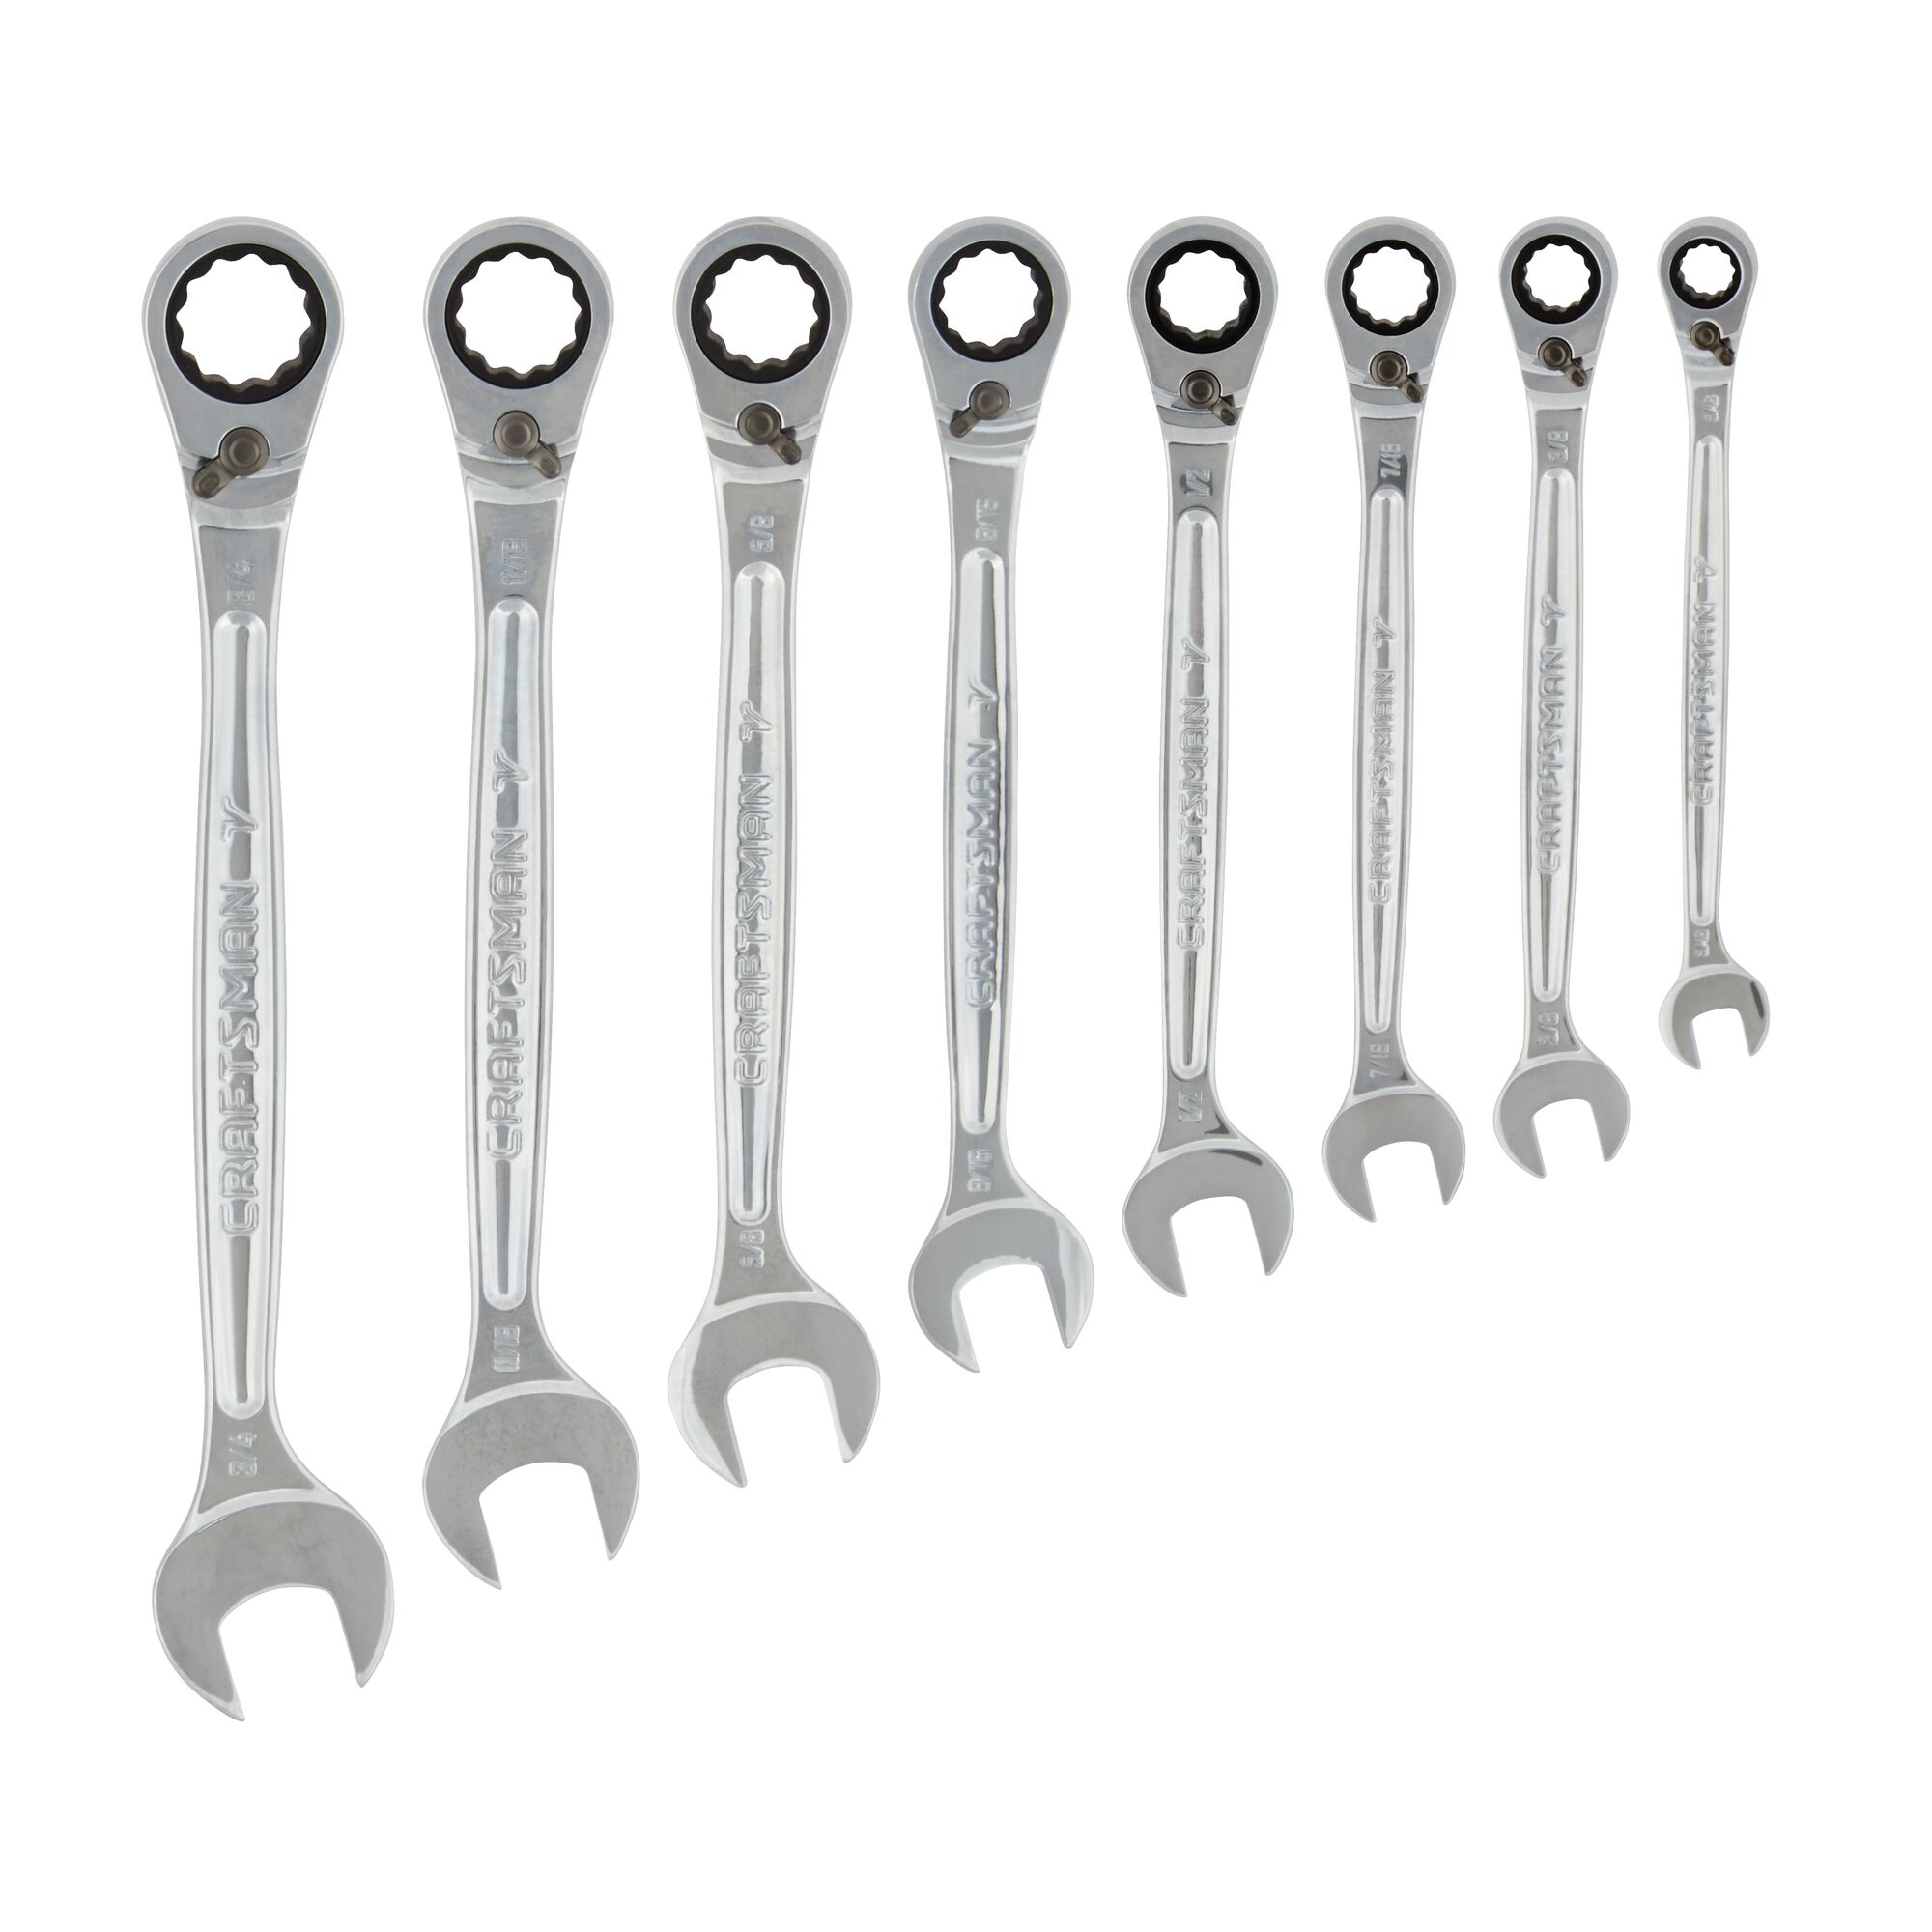 V series S A E reversible ratcheting combination wrench set (8 piece).